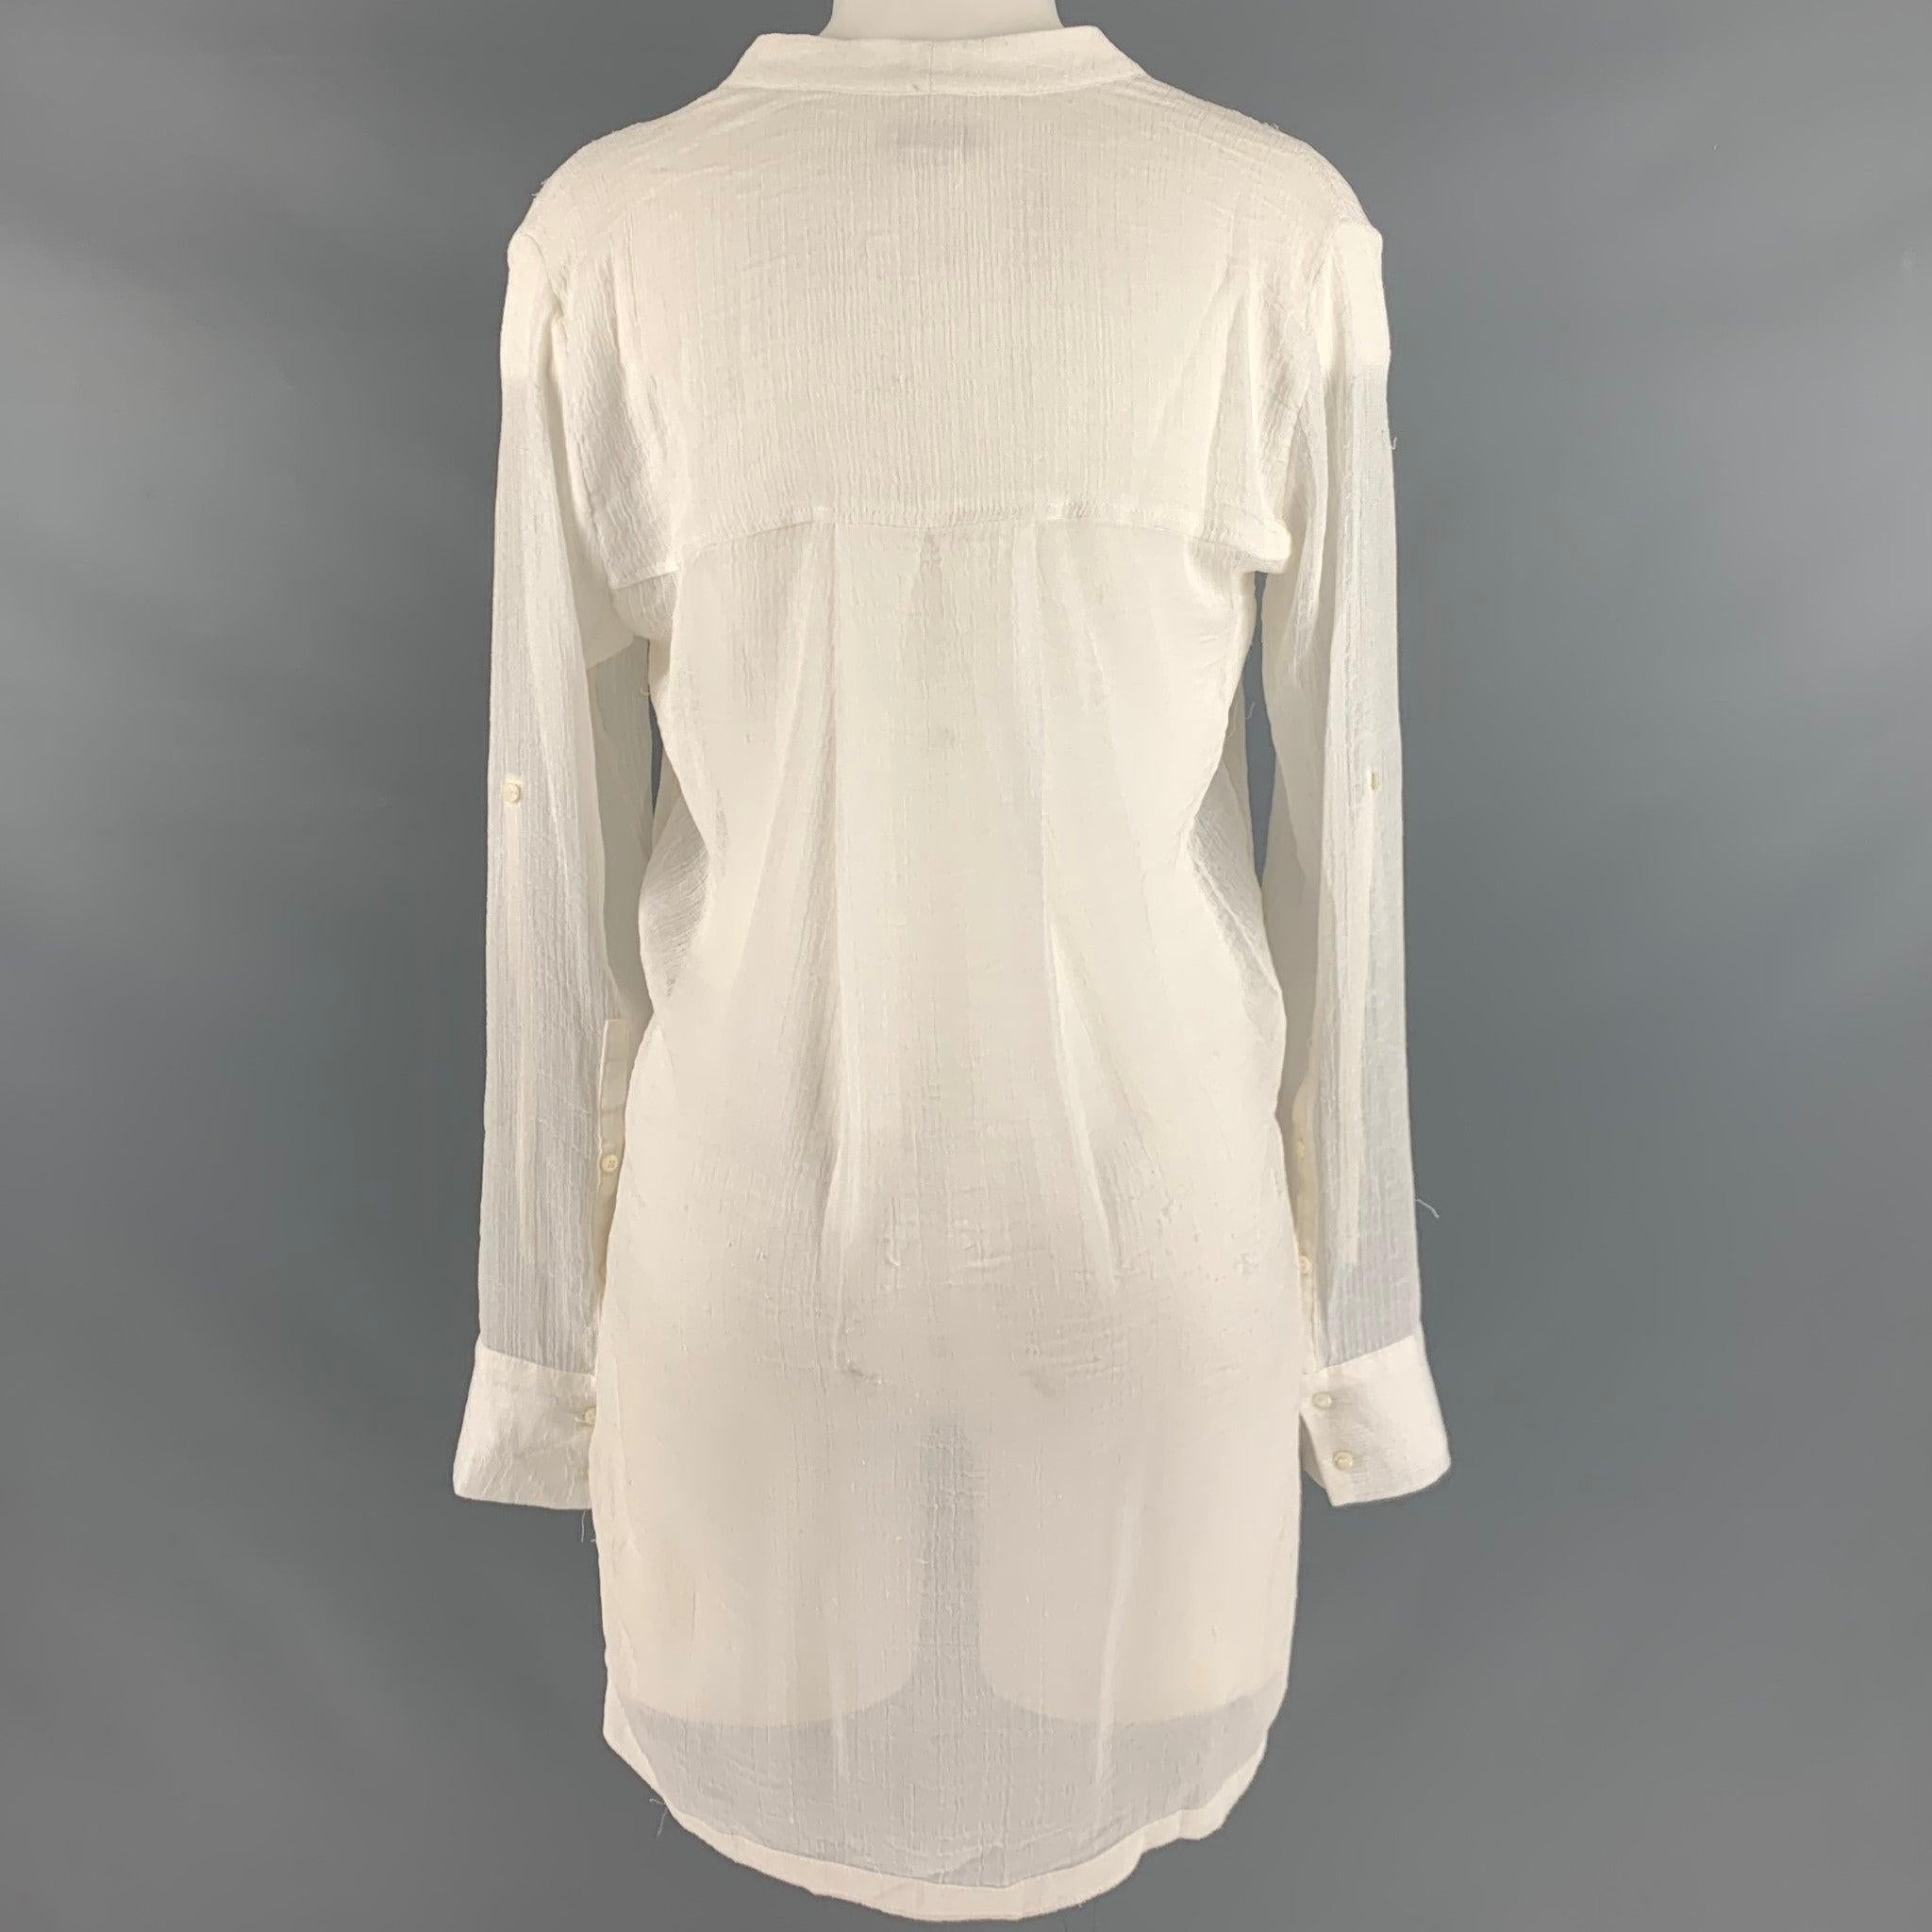 HELMUT LANG Size S White Triacetate Blend See Through Long Sleeve Casual Top In Good Condition For Sale In San Francisco, CA